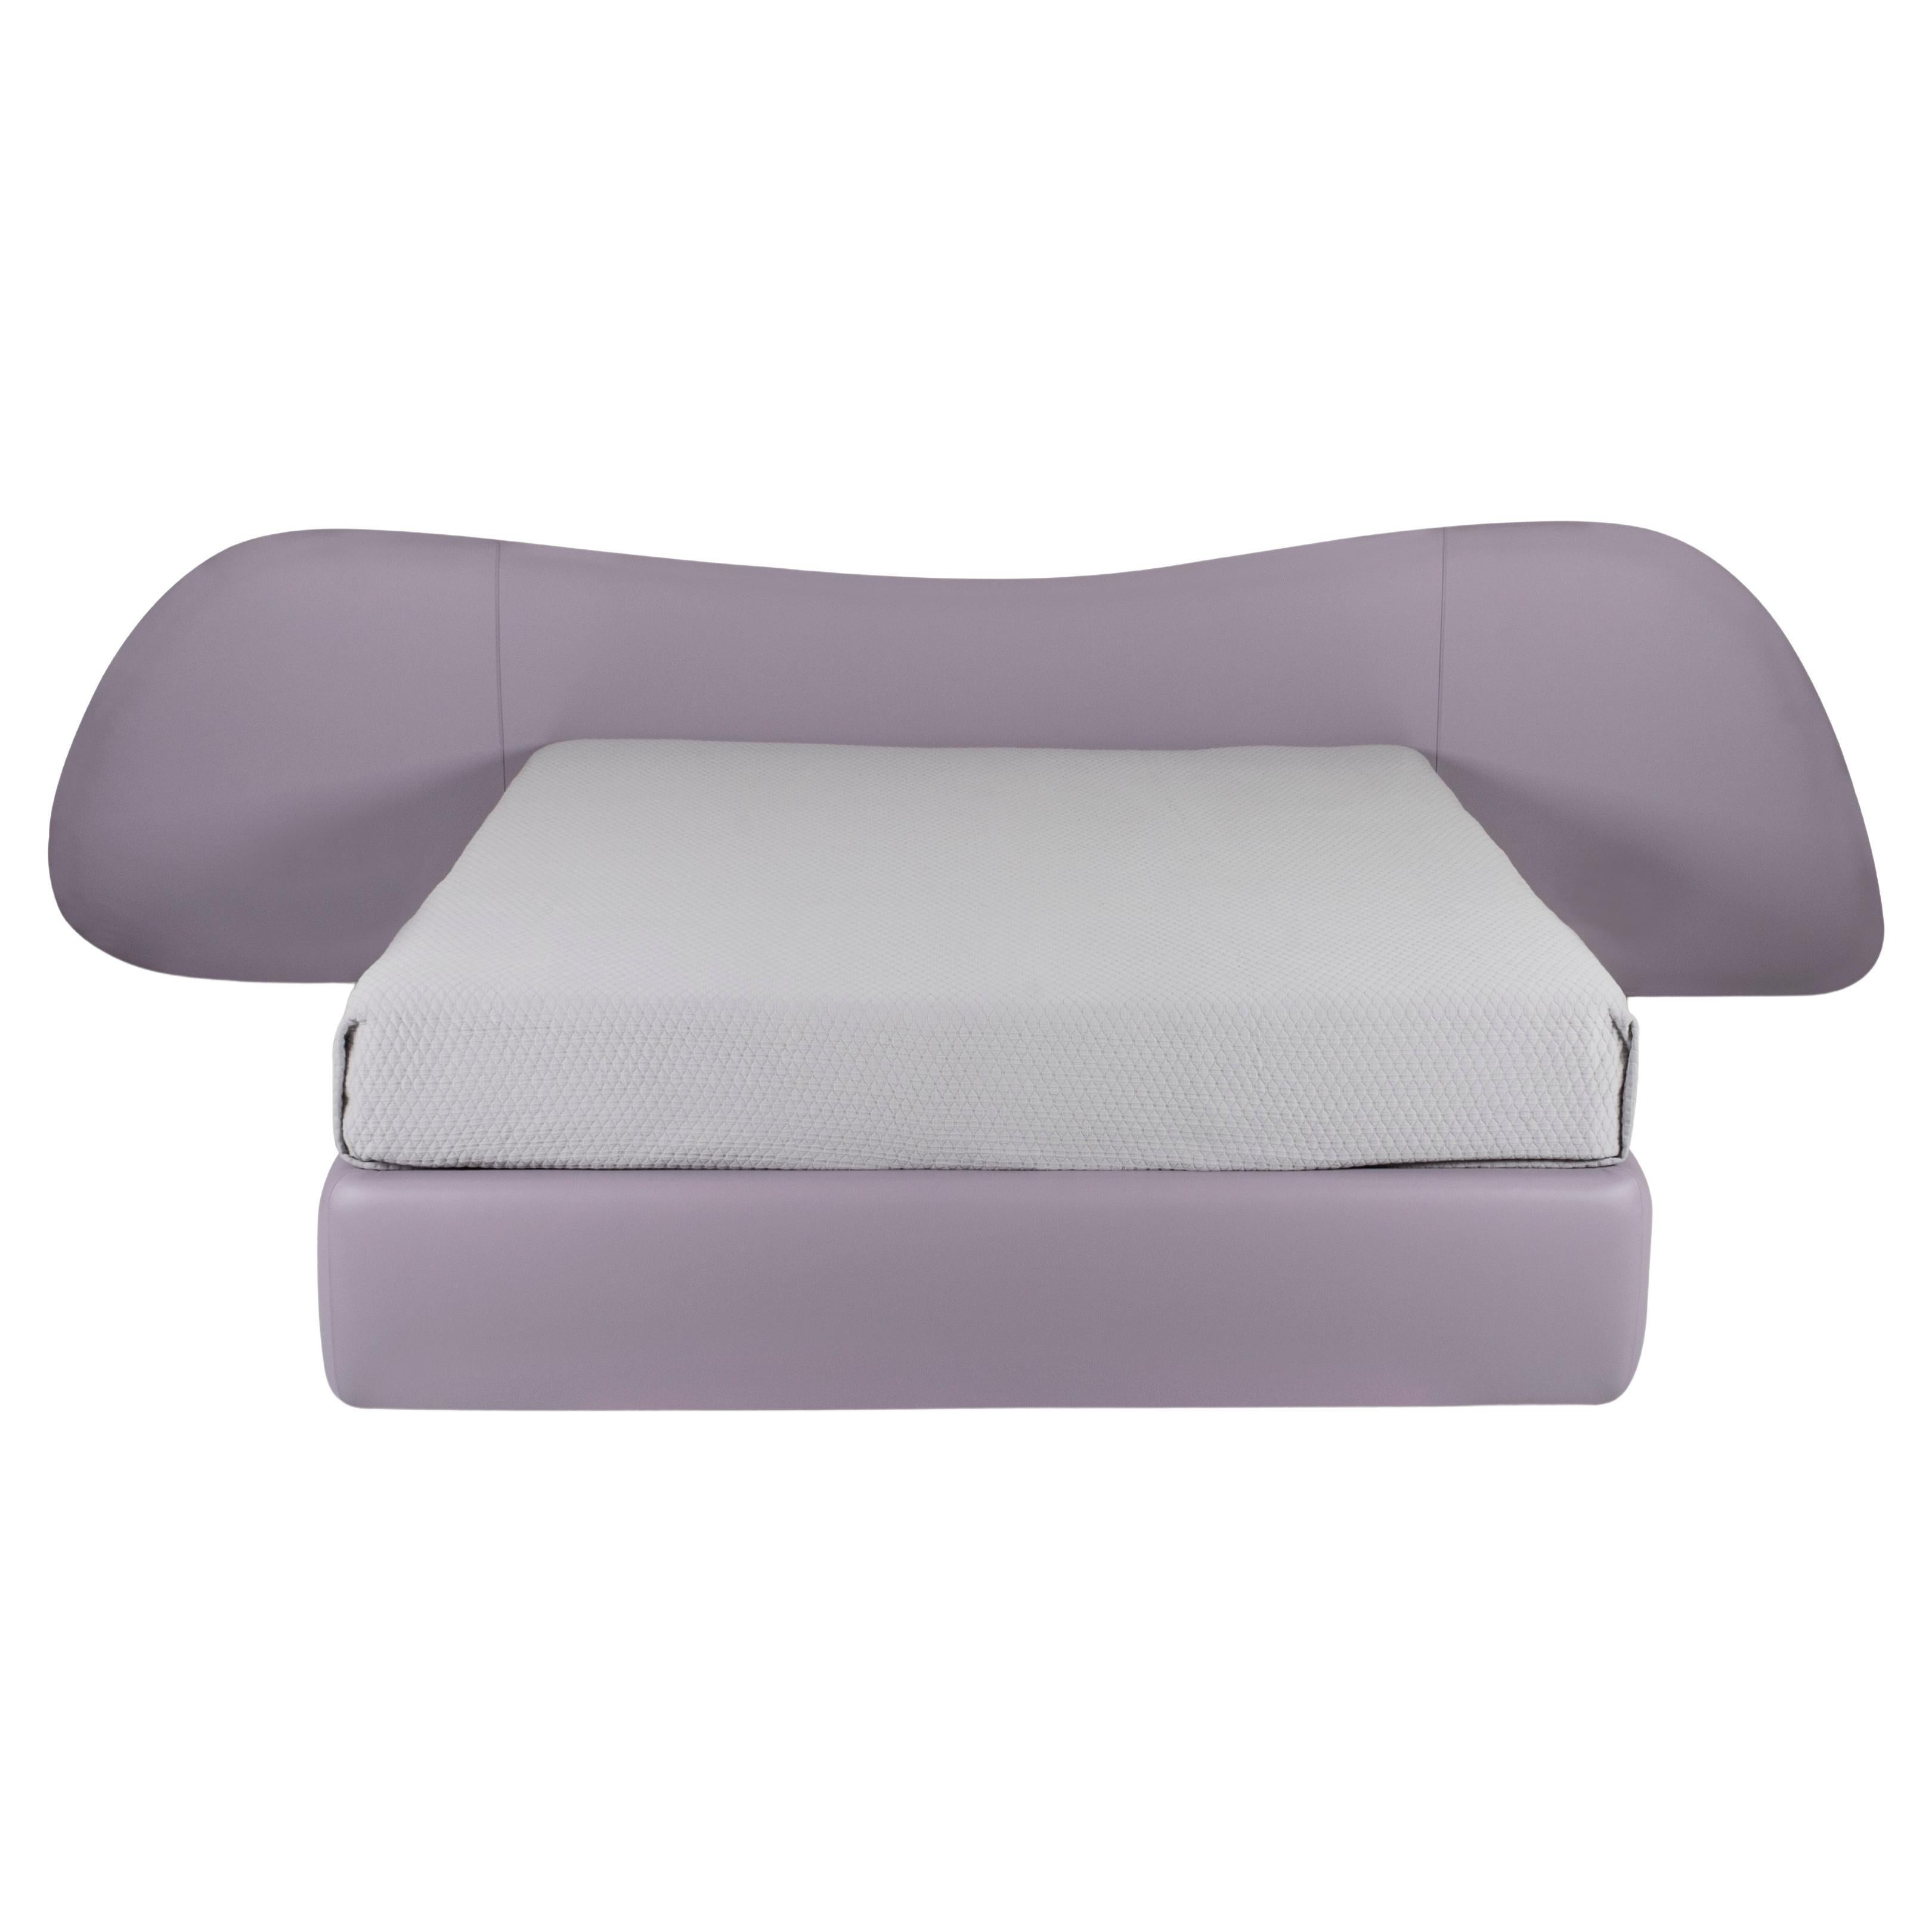 Greenapple Bed, Free Hand Bed, Purple Leather, Handmade in Portugal